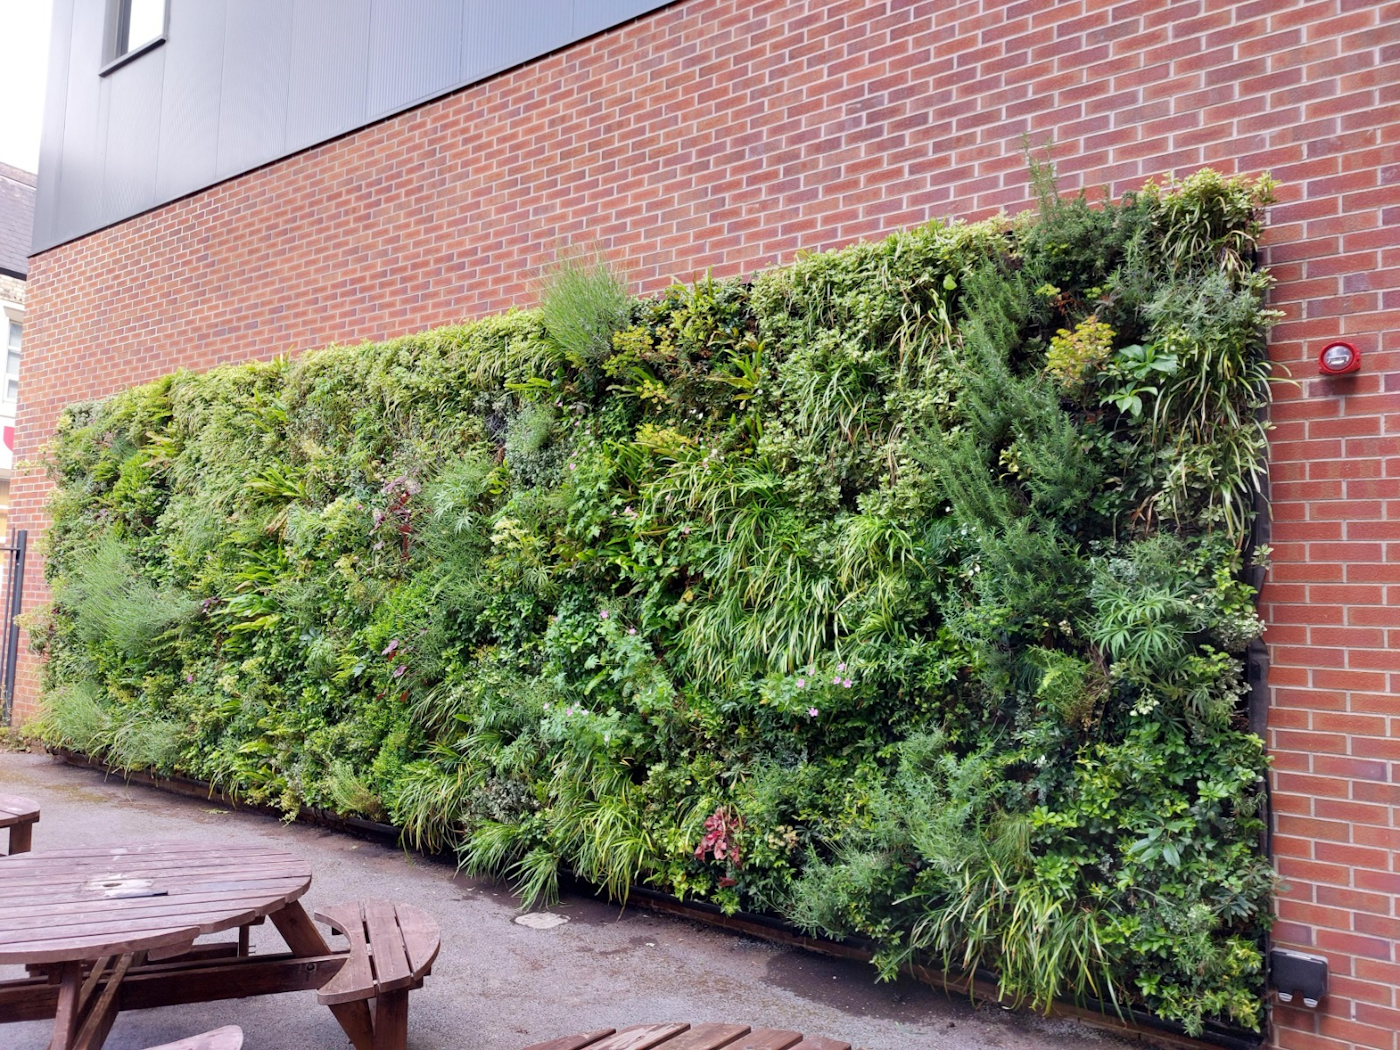 Living Wall by picnic benches